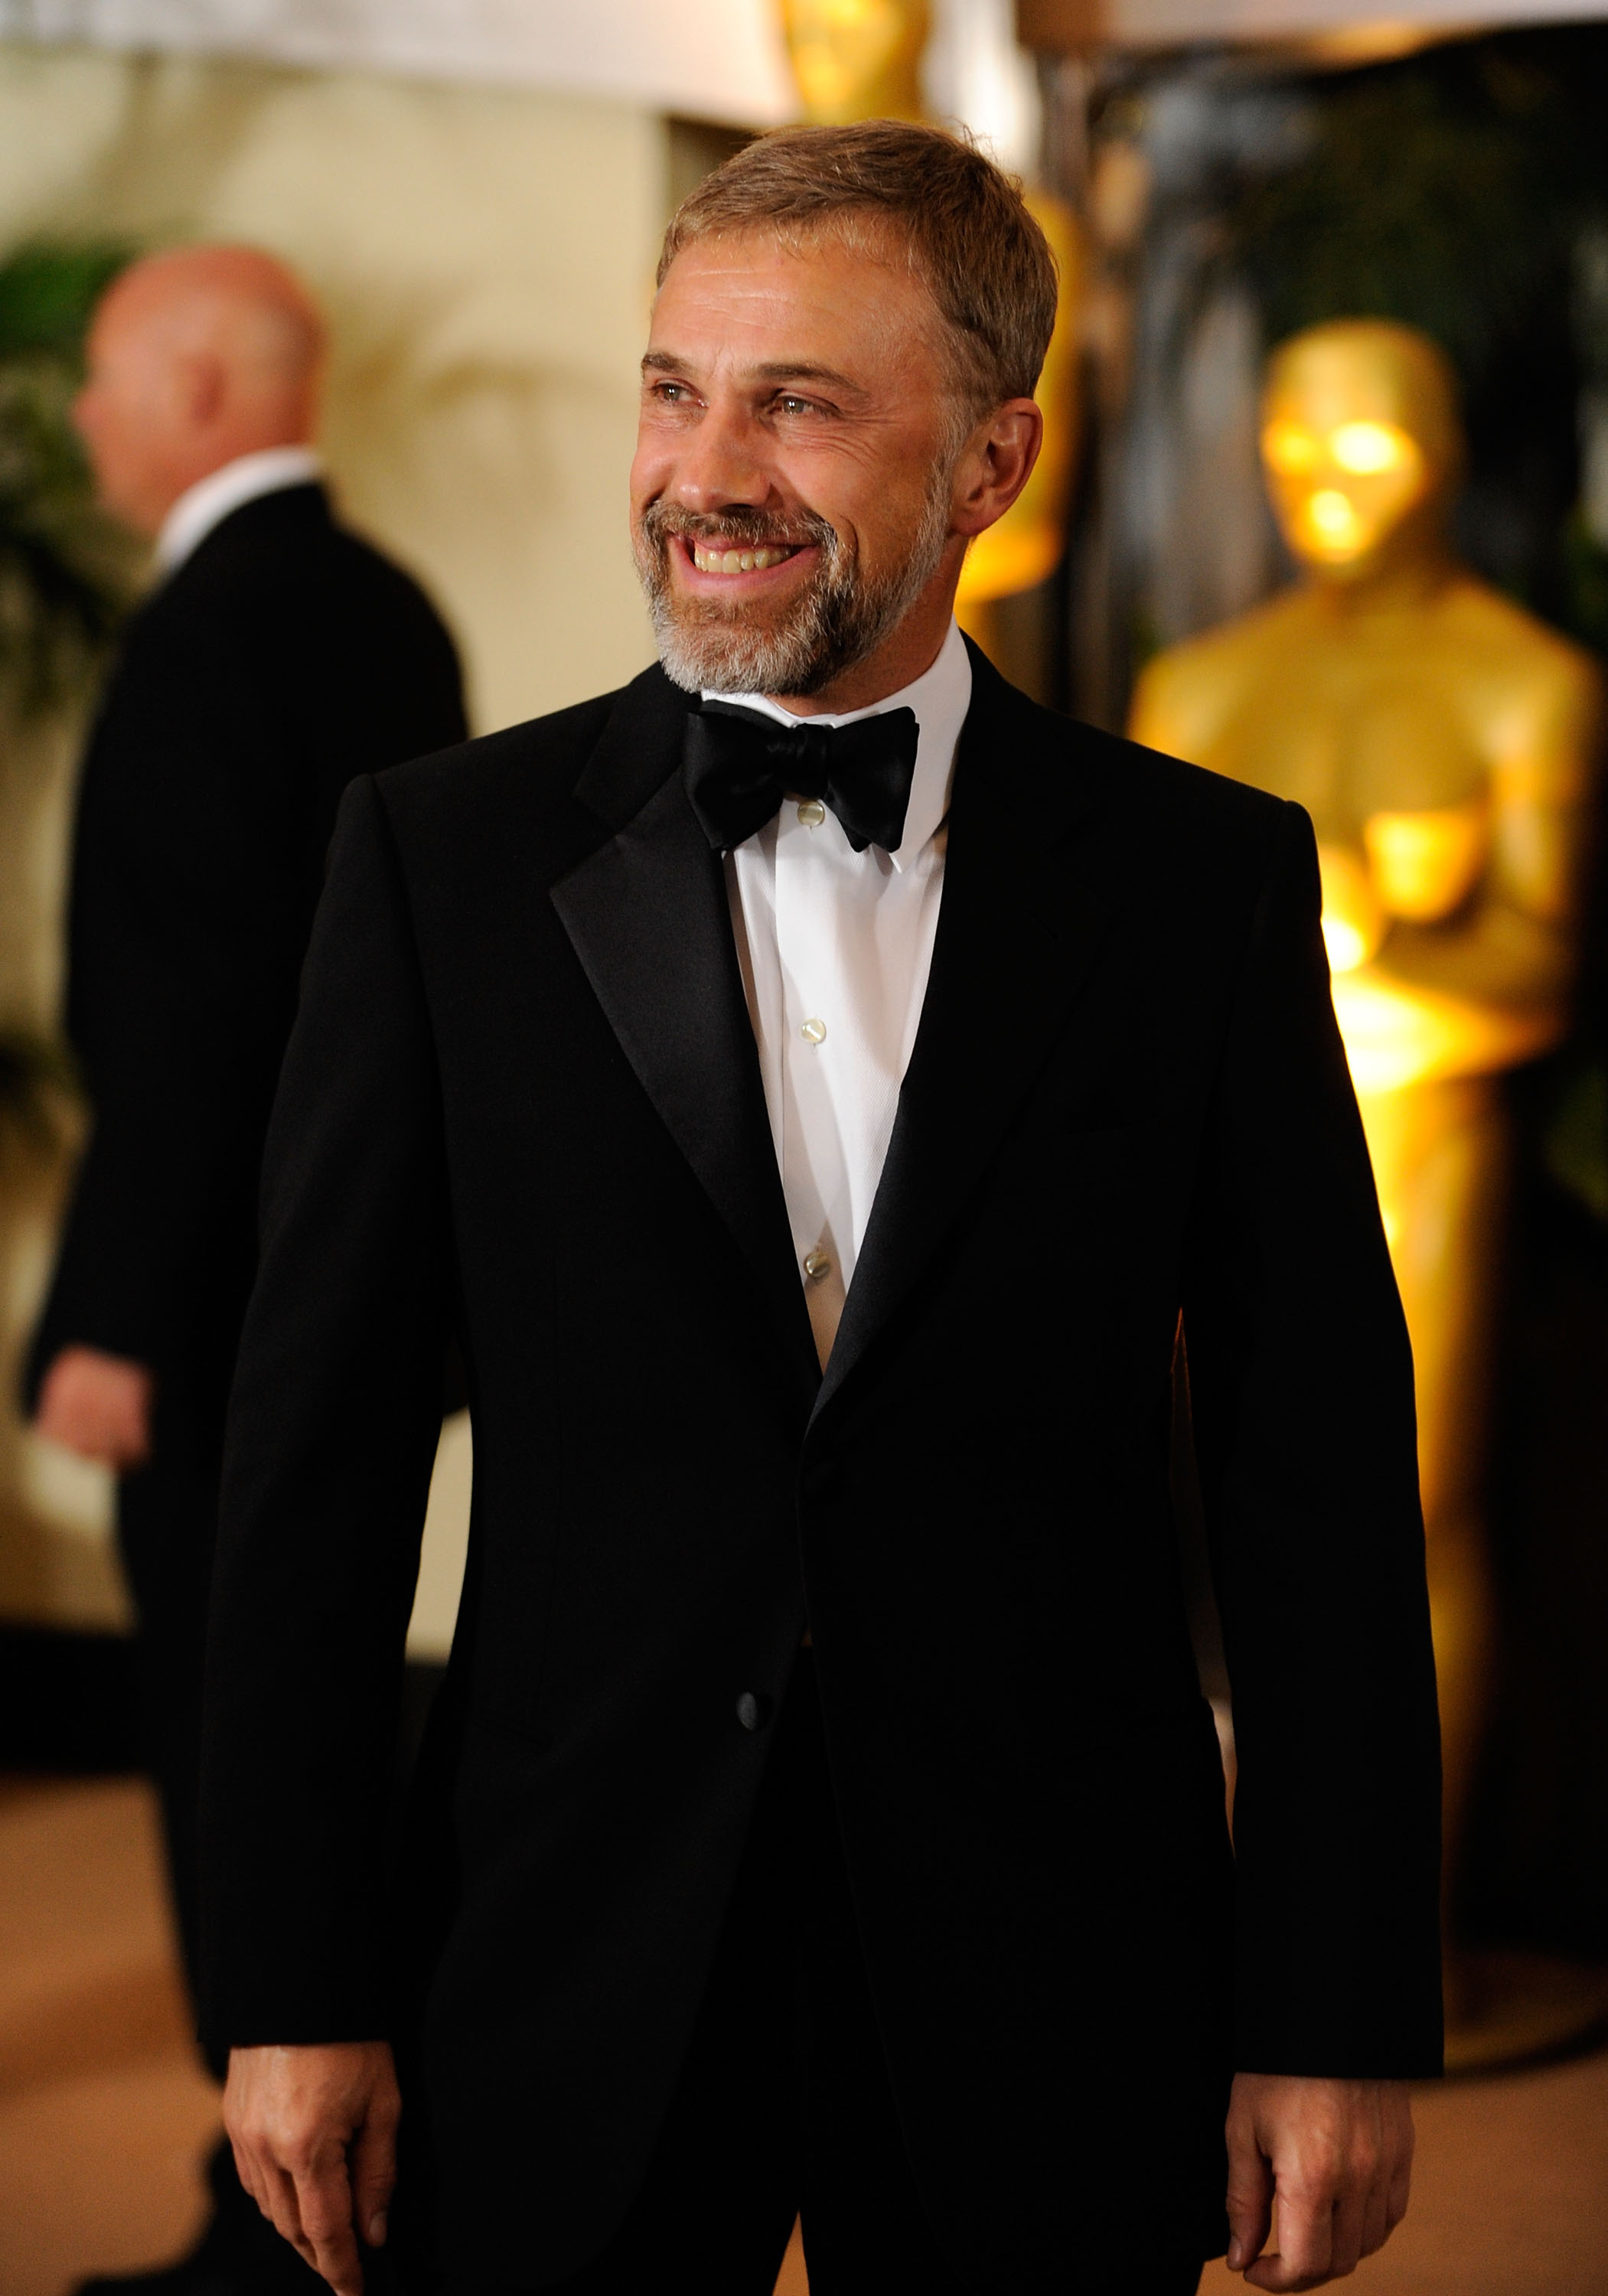 Actor Christoph Waltz arrives at the Academy of Motion Picture Arts and Sciences' Inaugural Governors Awards held at the Grand Ballroom at Hollywood &amp; Highland Center on November 14, 2009 in Los Angeles, California. (Kevork Djansezian—Getty Images)